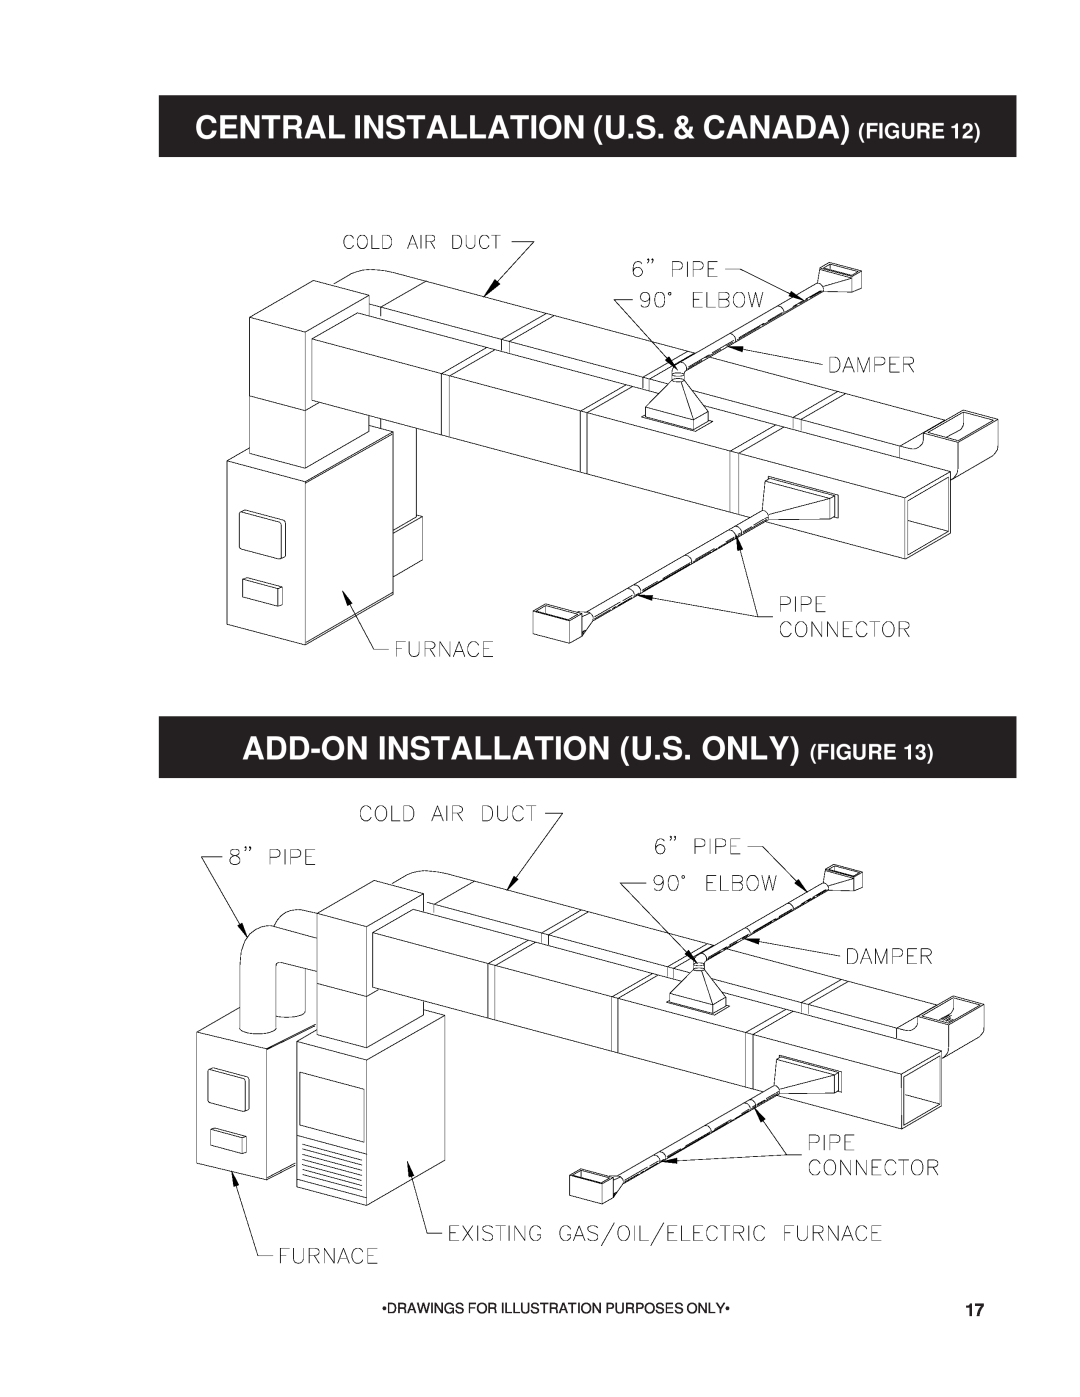 United States Stove 22AF owner manual Central Installation U.S. & Canada Figure, Add-Oninstallation U.S. Only Figure 